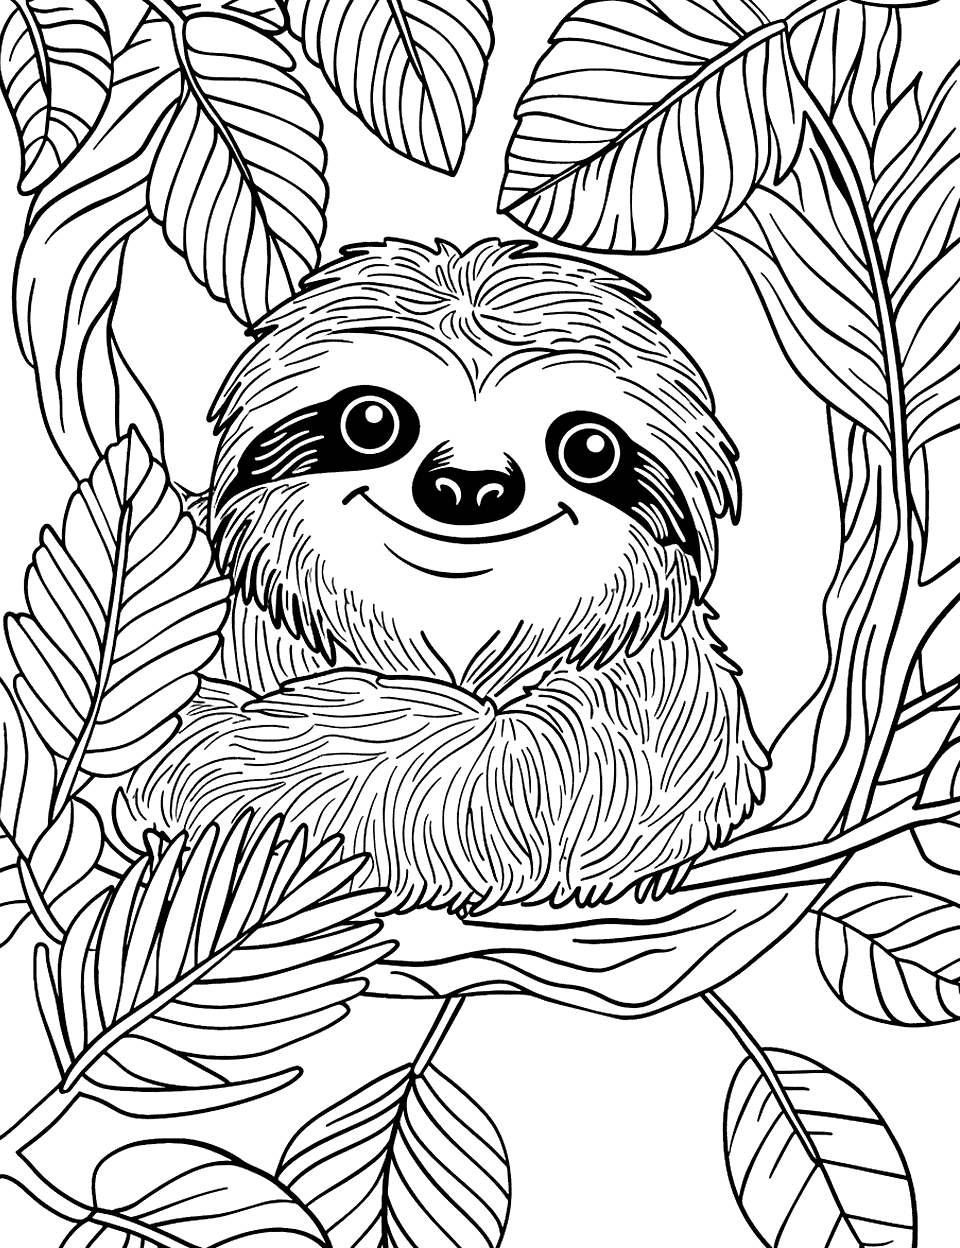 Sid the Sloth Look-Alike Coloring Page - A sloth with distinct facial expressions resembling Sid from popular animations, peeking out from behind some foliage.